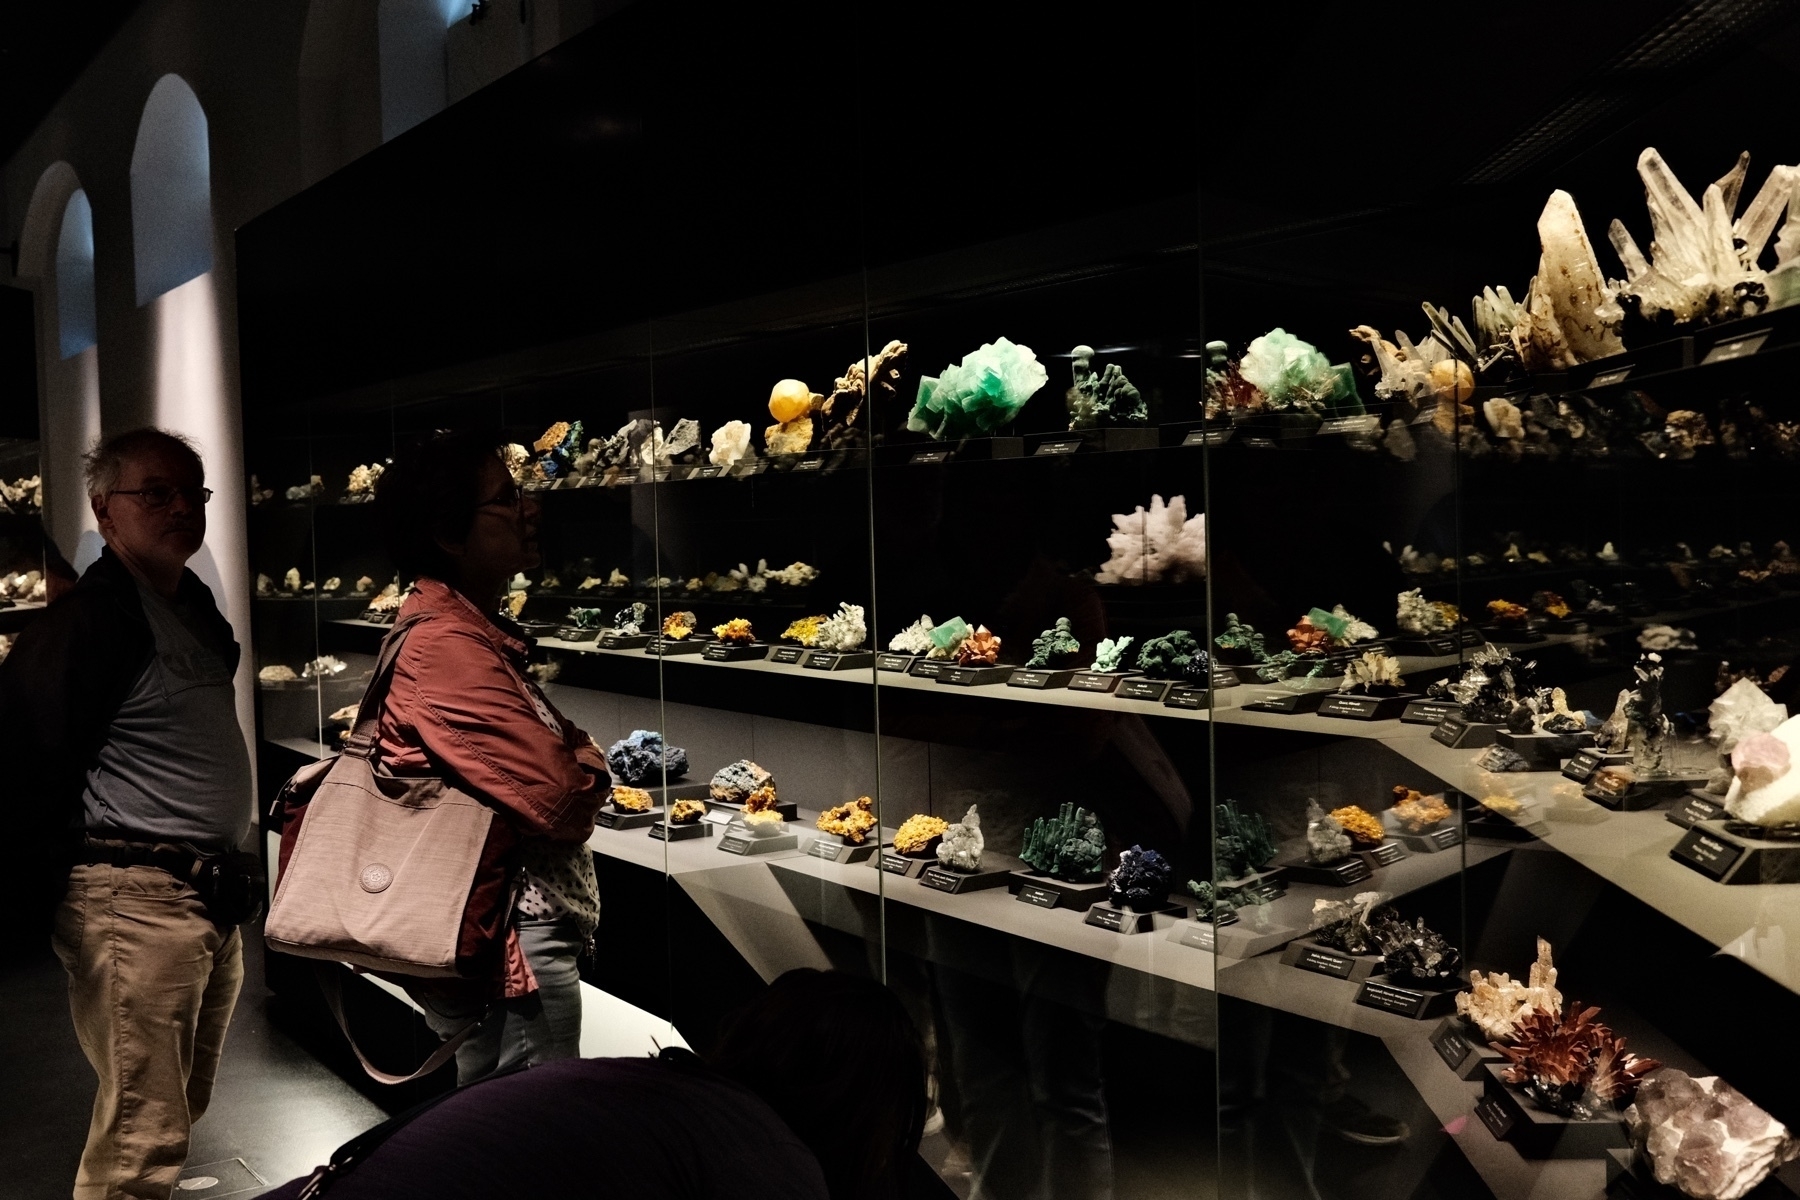 lit mineral specimens in a dark hall with two people enjoying the sights